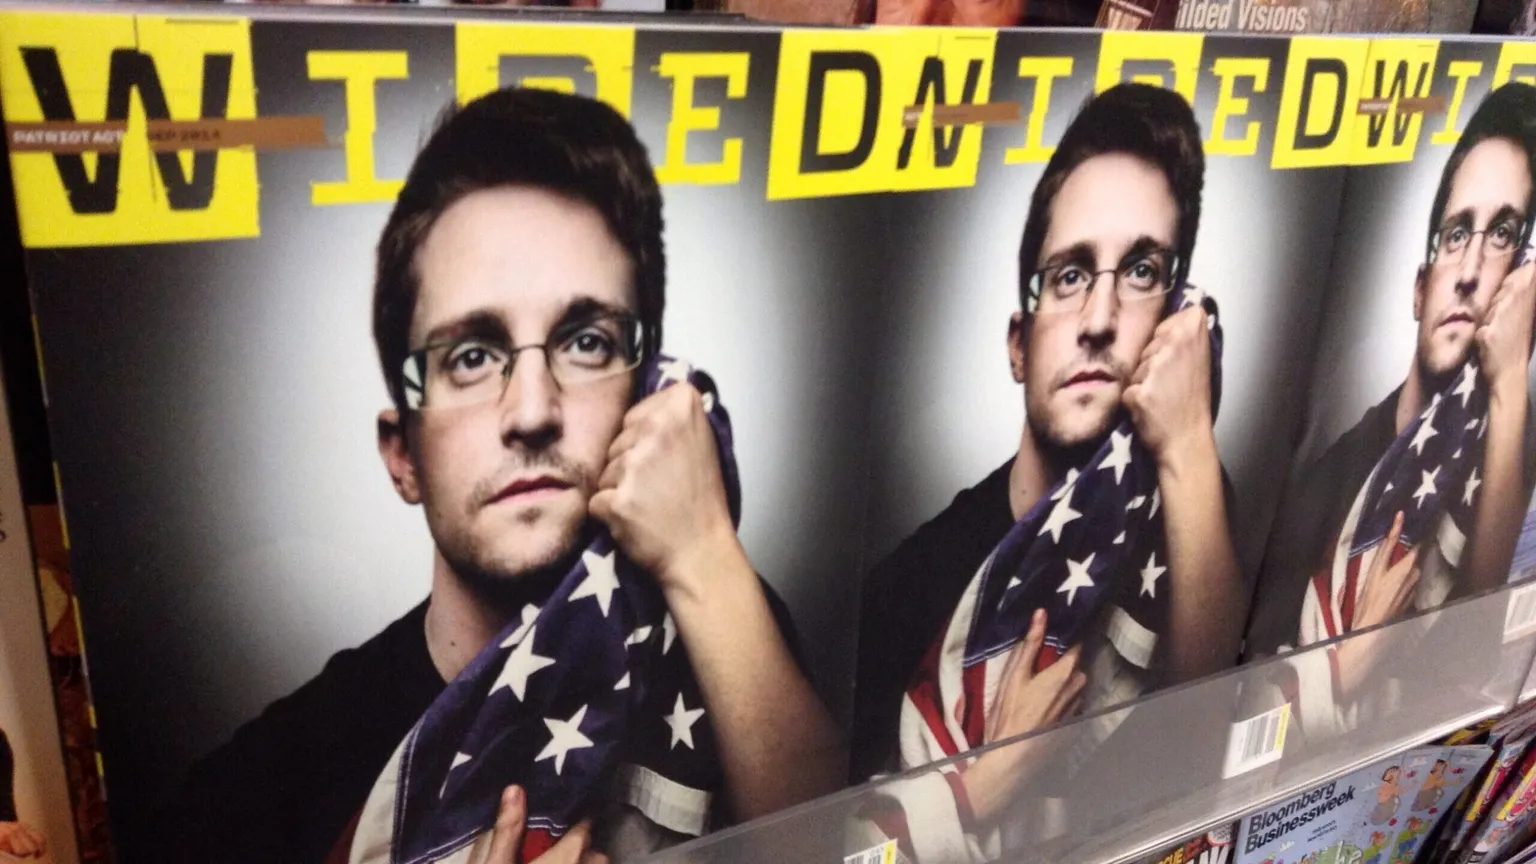 Edward Snowden on the cover of Wired